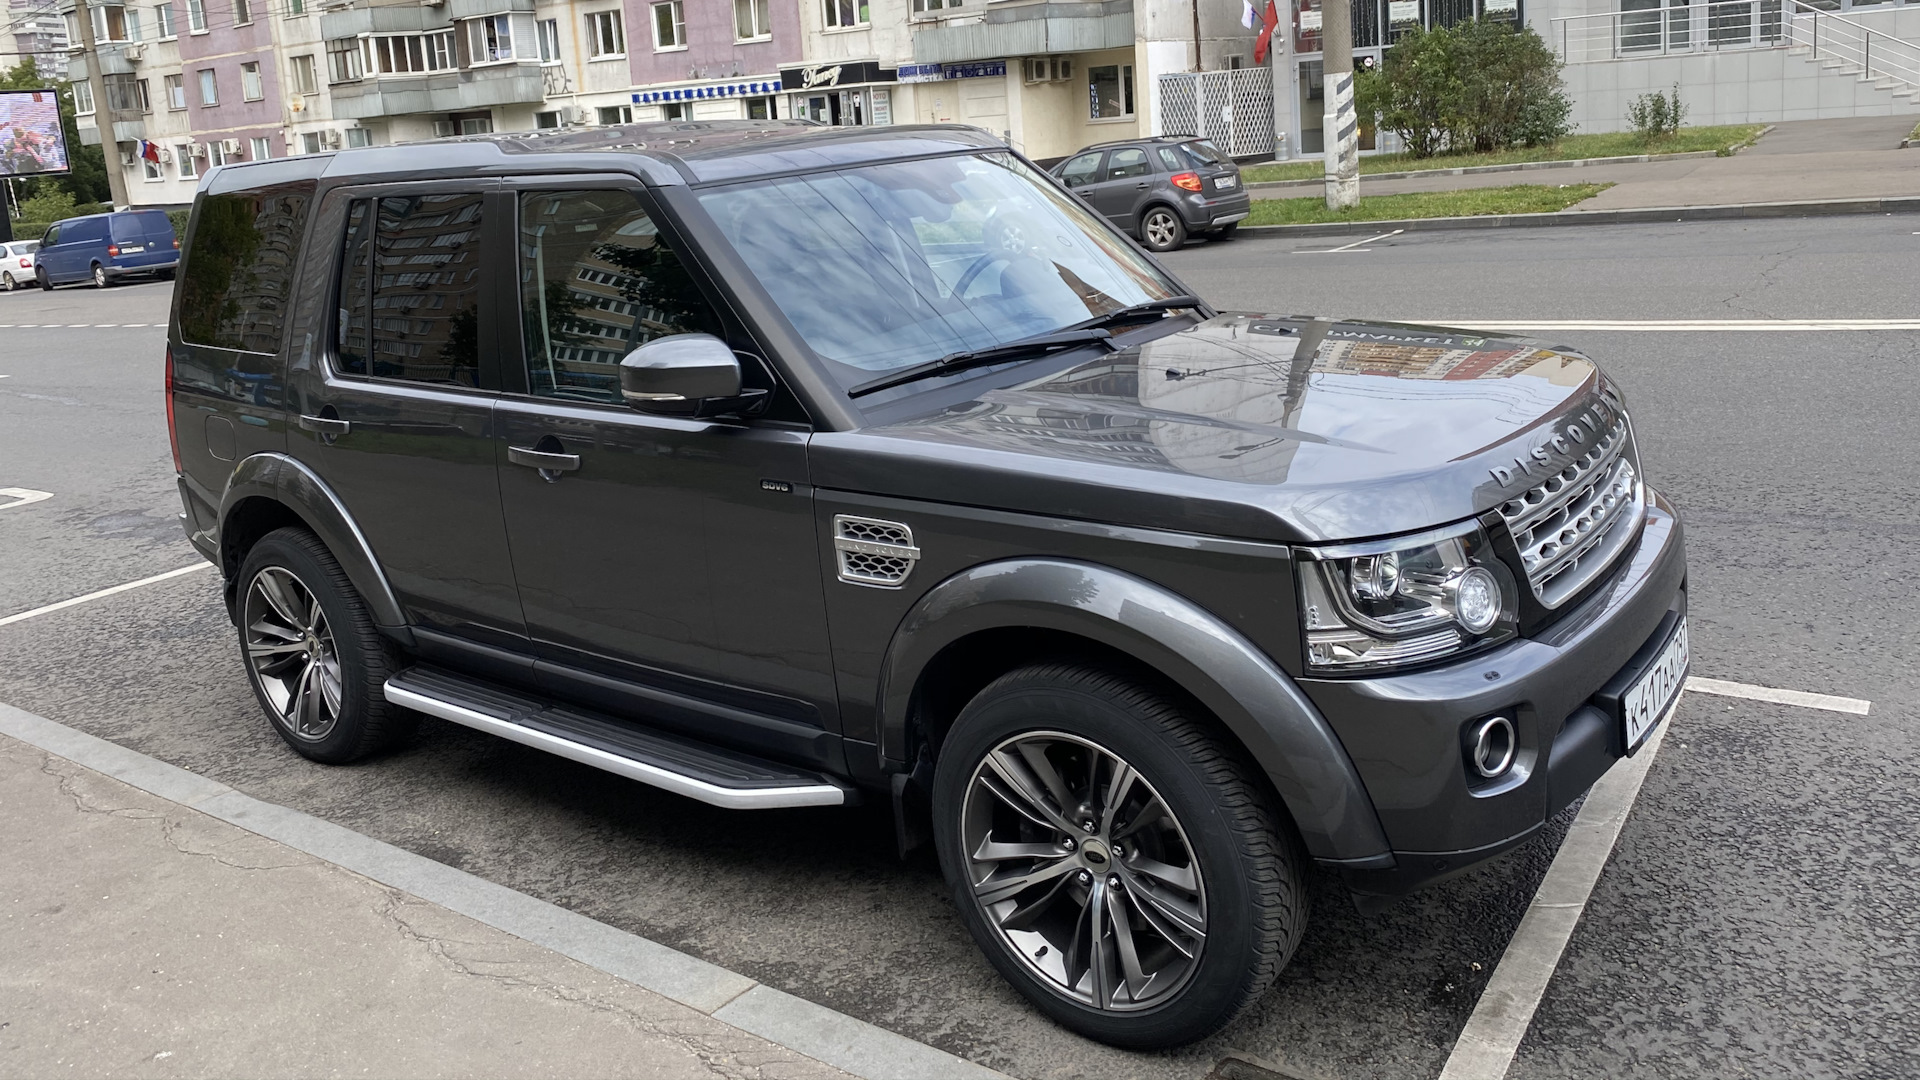 Дискавери диски купить. Ленд Ровер Дискавери 4. Диски Land Rover Discovery 4. Land Rover Discovery 4 Tuning. Ленд Ровер Дискавери 4 тюнинг.